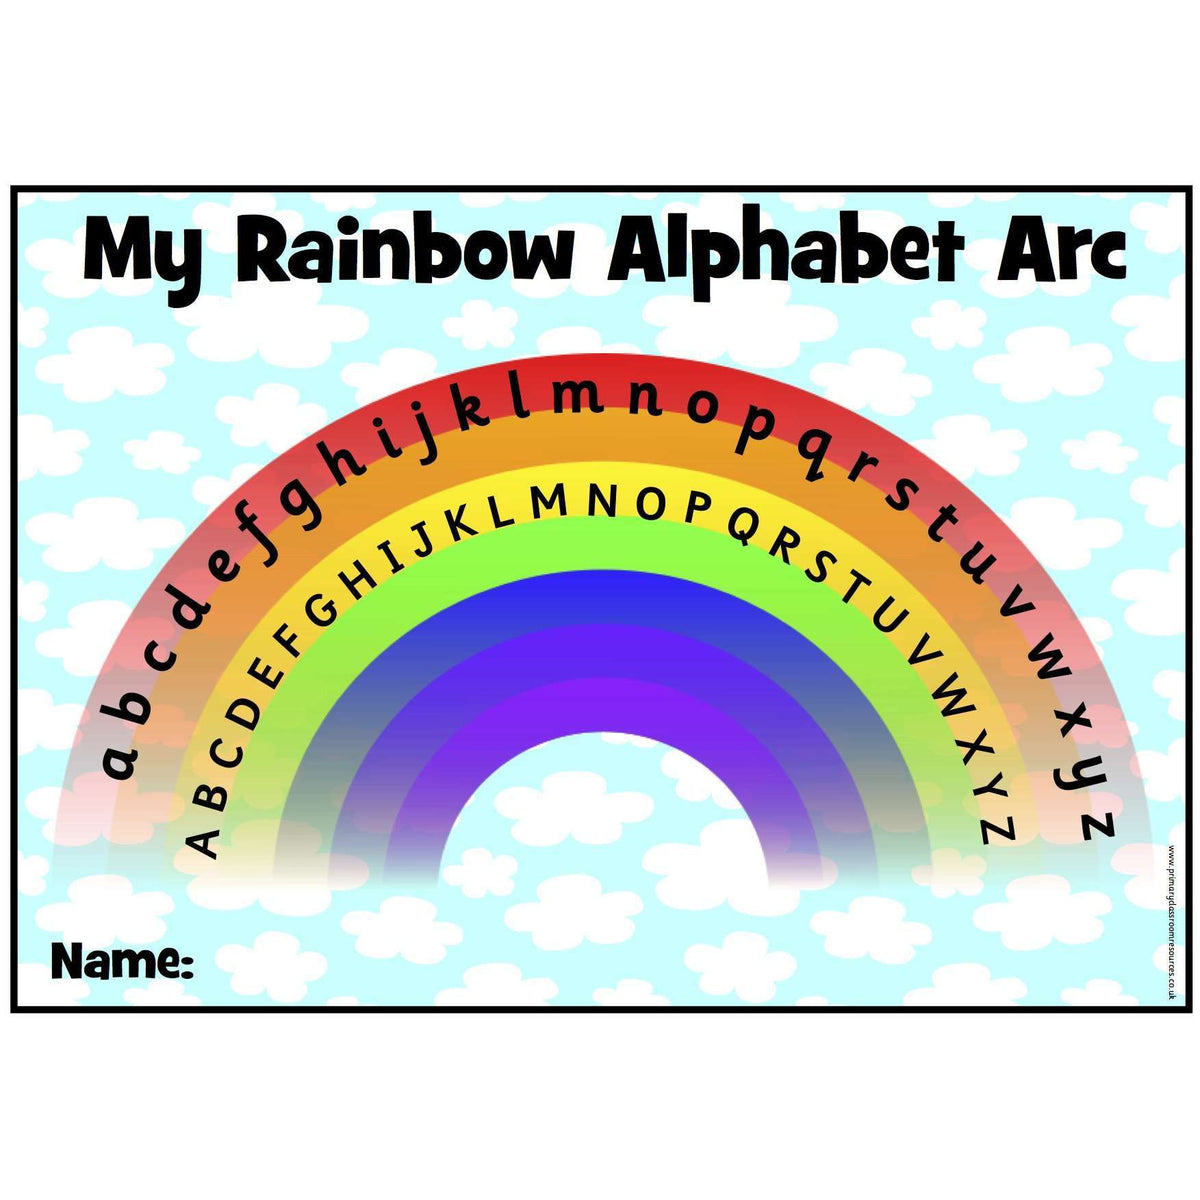 My Rainbow Alphabet Arc - Upper and Lower Case – Primary Classroom Resources1200 x 1200